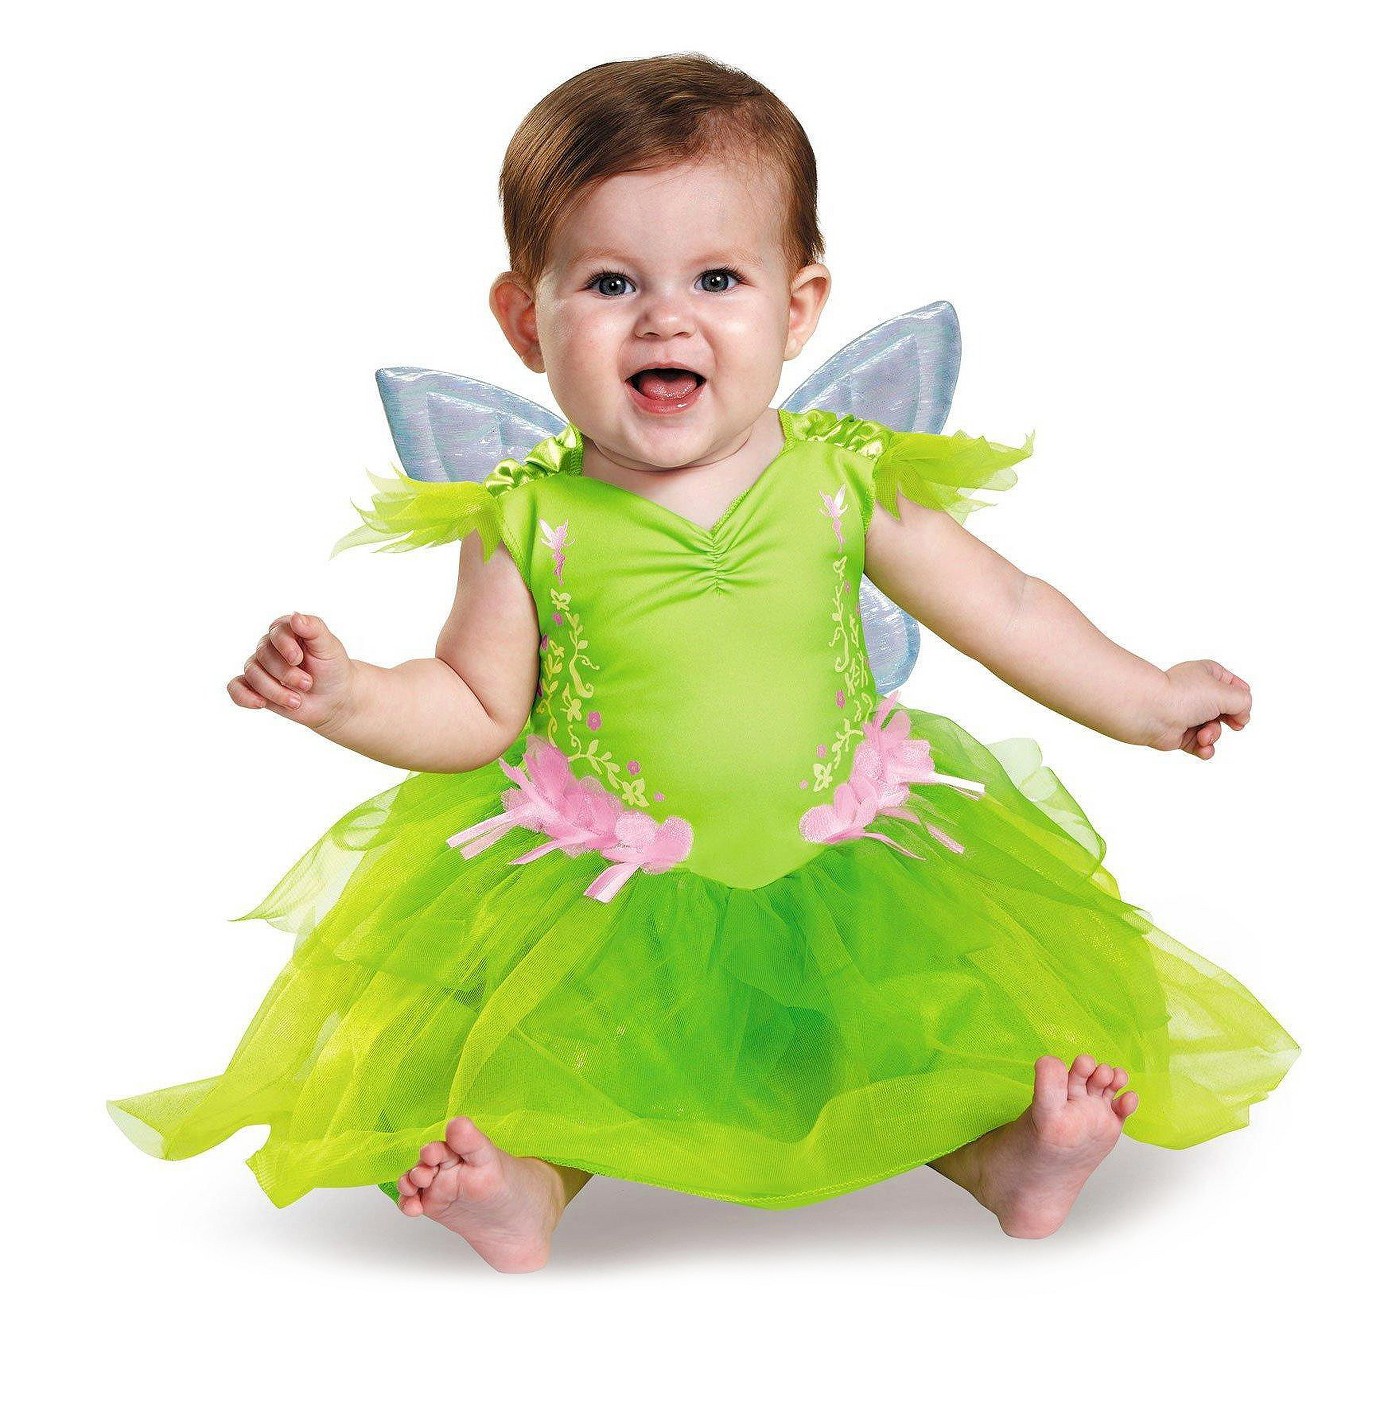 Adorable Halloween Costume Ideas For Baby Girls